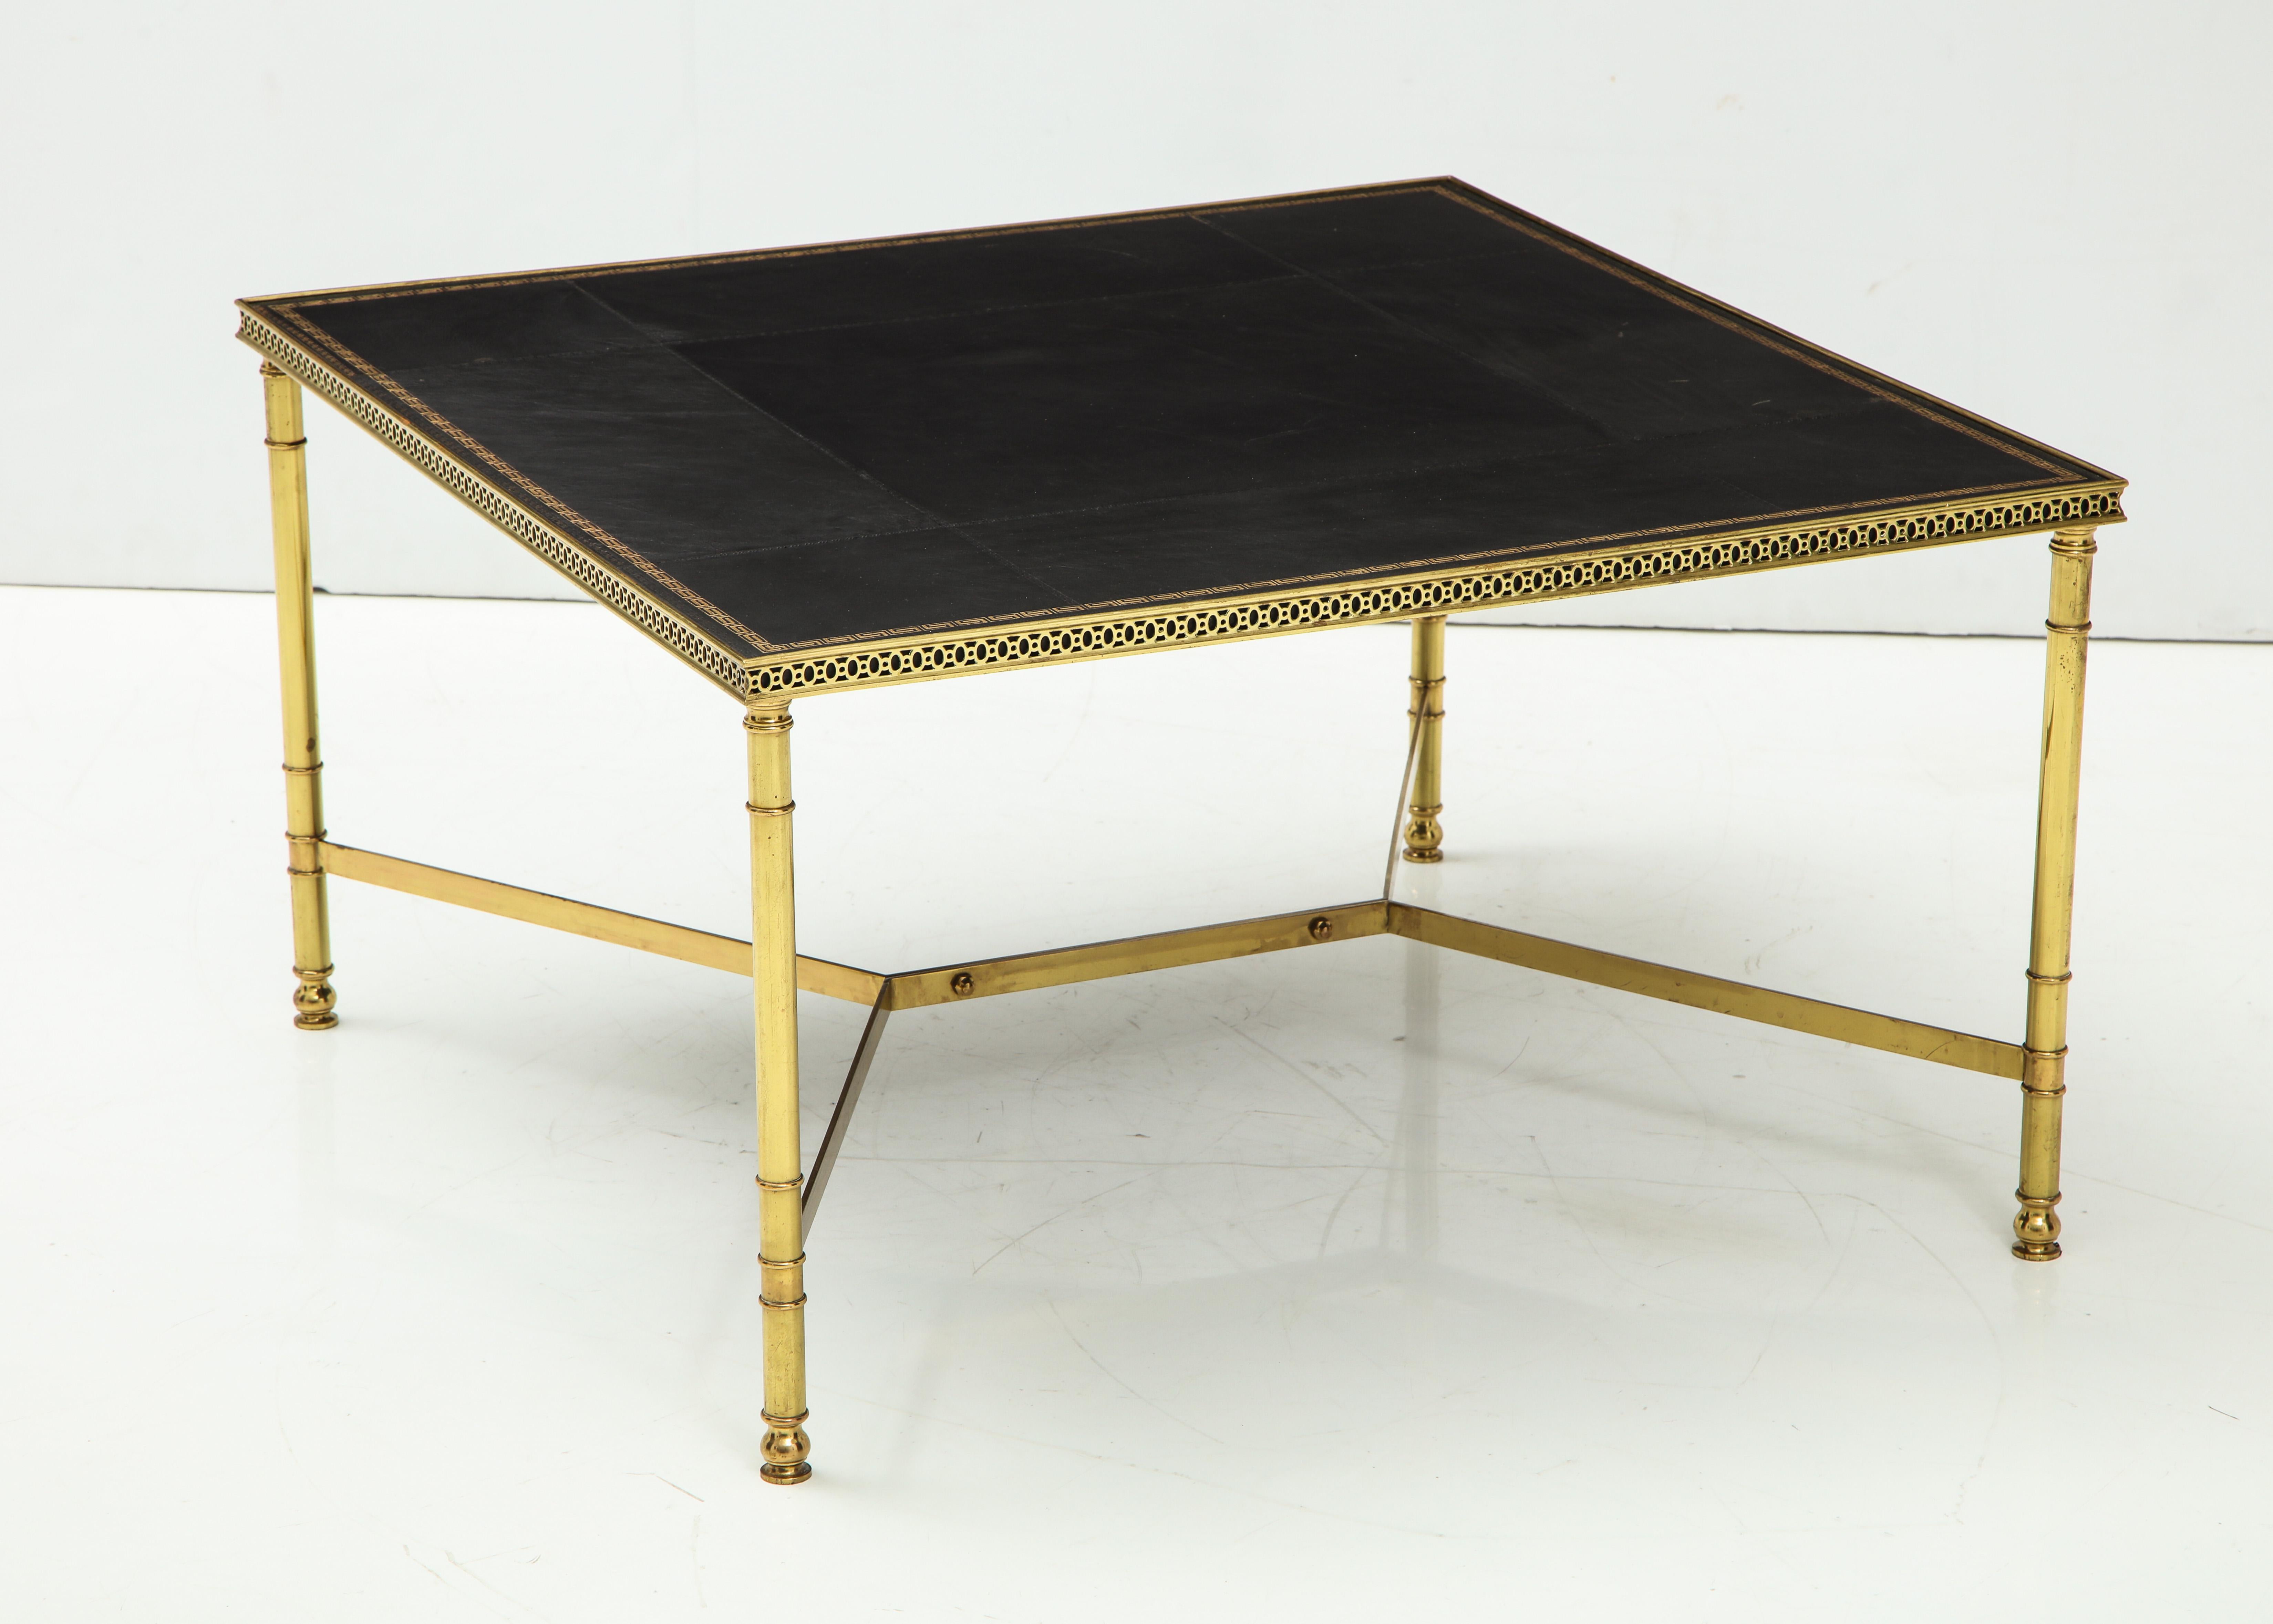 Square bronze bamboo Jansen coffee table with a segmented Greek key leather top.